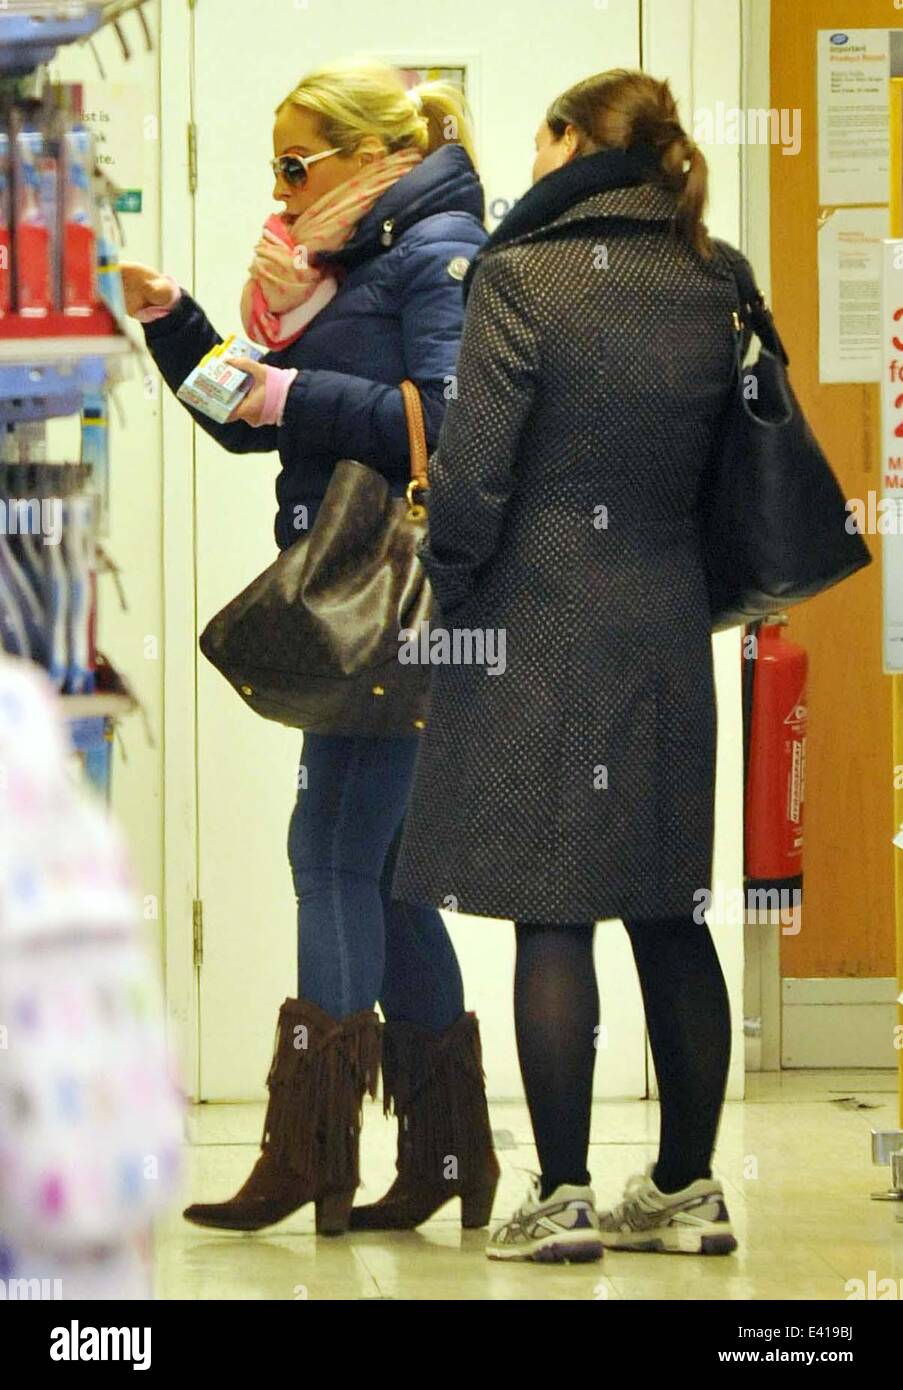 Former Celebrity Big Brother contestant Danielle Marr goes shopping in  Dublin with a friend and stops by a Boots store on Baggot Street, appearing  to browse Clearblue pregnancy test kits Featuring: Danielle